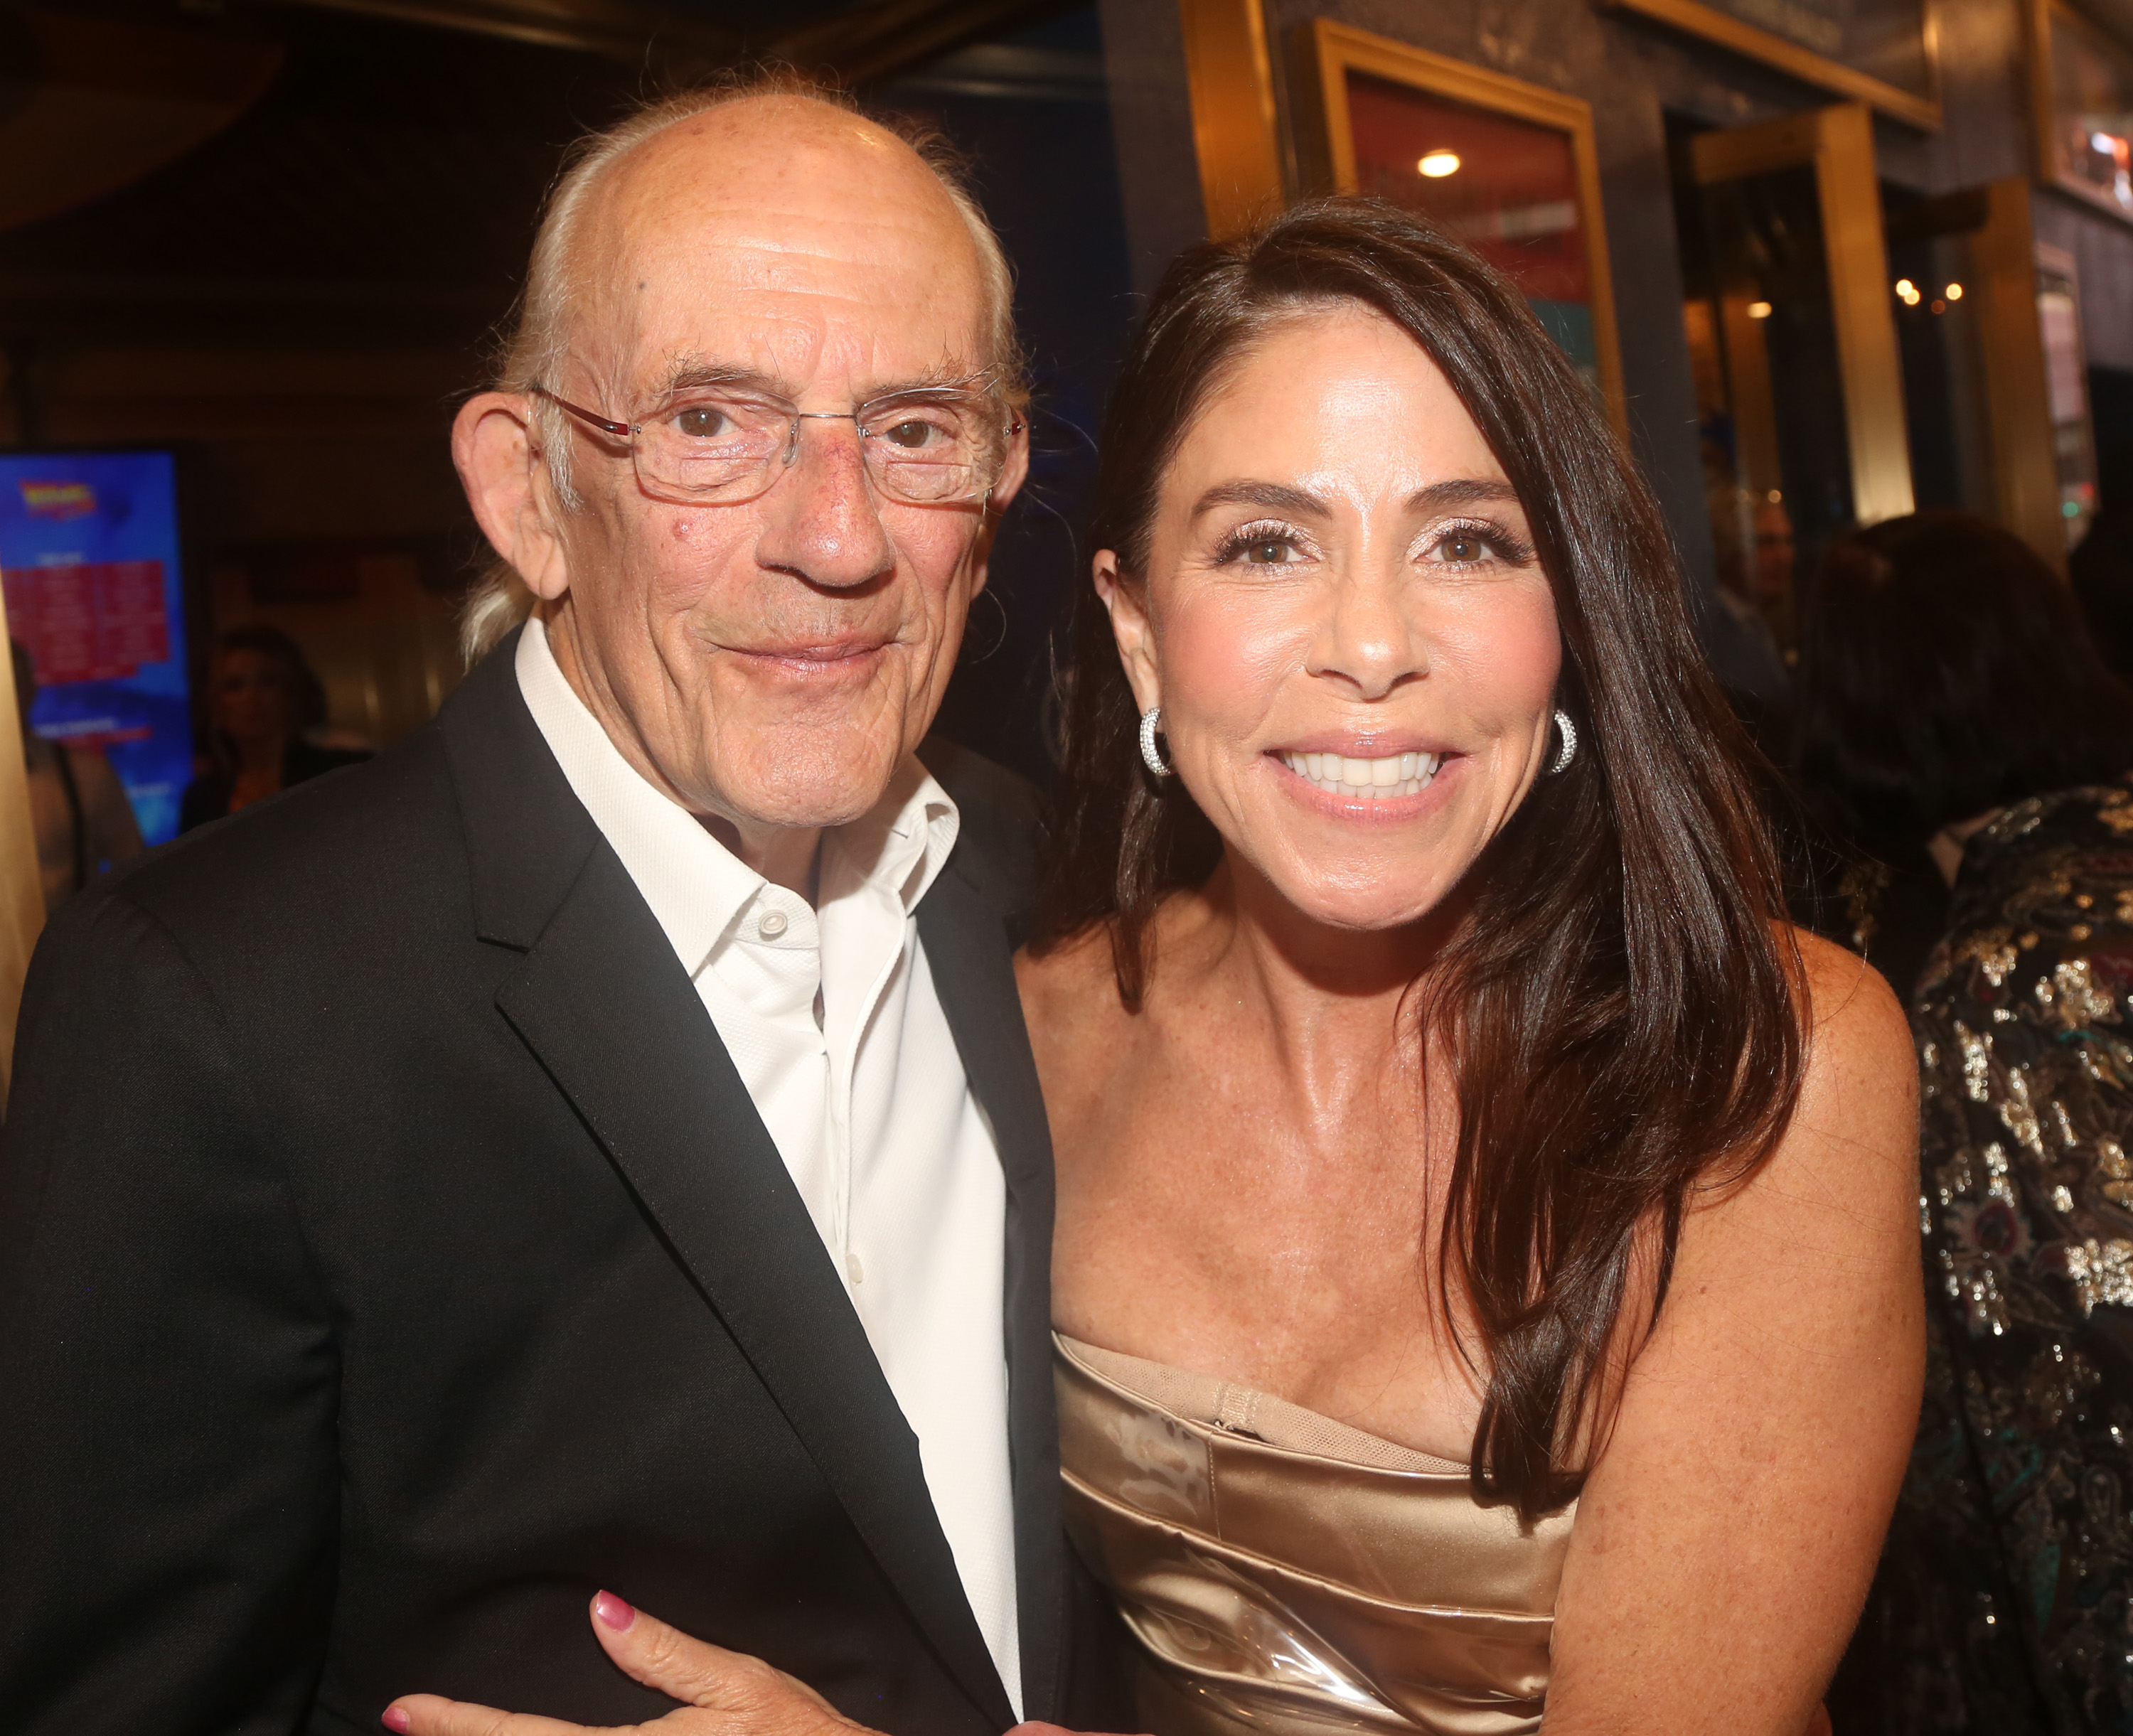 Christopher Lloyd and Lisa Loiacono Lloyd attend the Michael J. Fox Foundation opening night gala performance of "Back to the Future: The Musical" in New York City on July 25, 2023 | Source: Getty Images